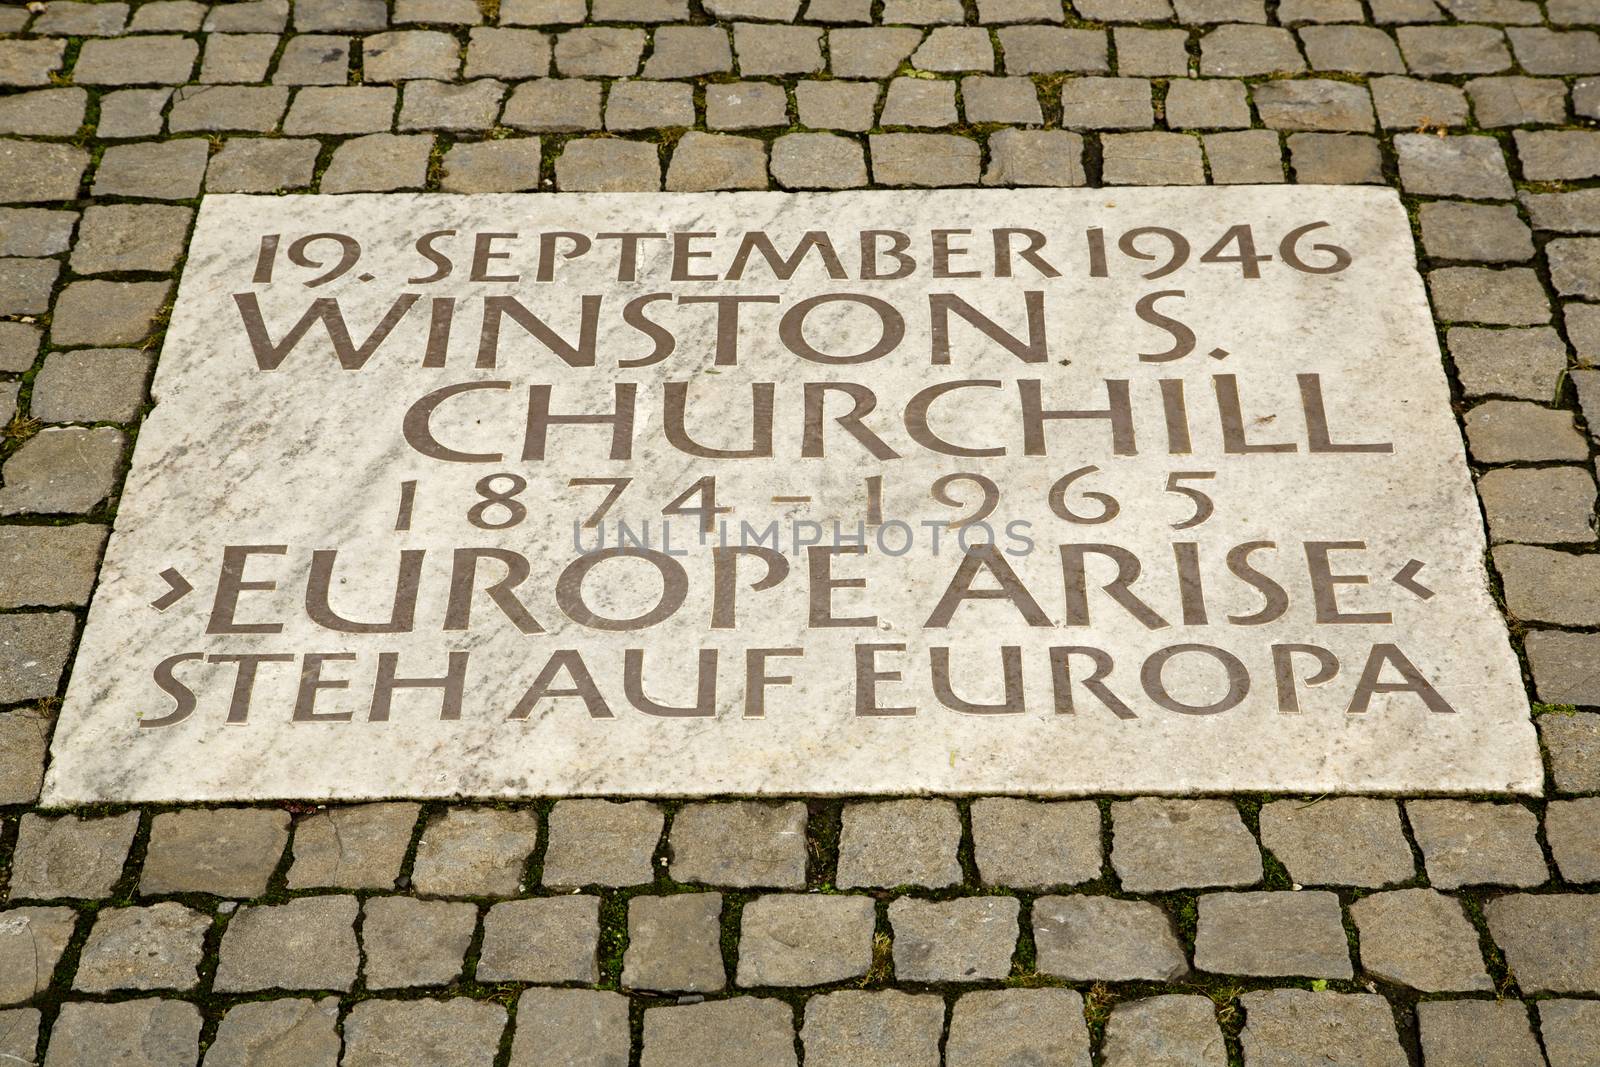 Commemorative plaque for the speech of Winston Churchill at the University of Zurich